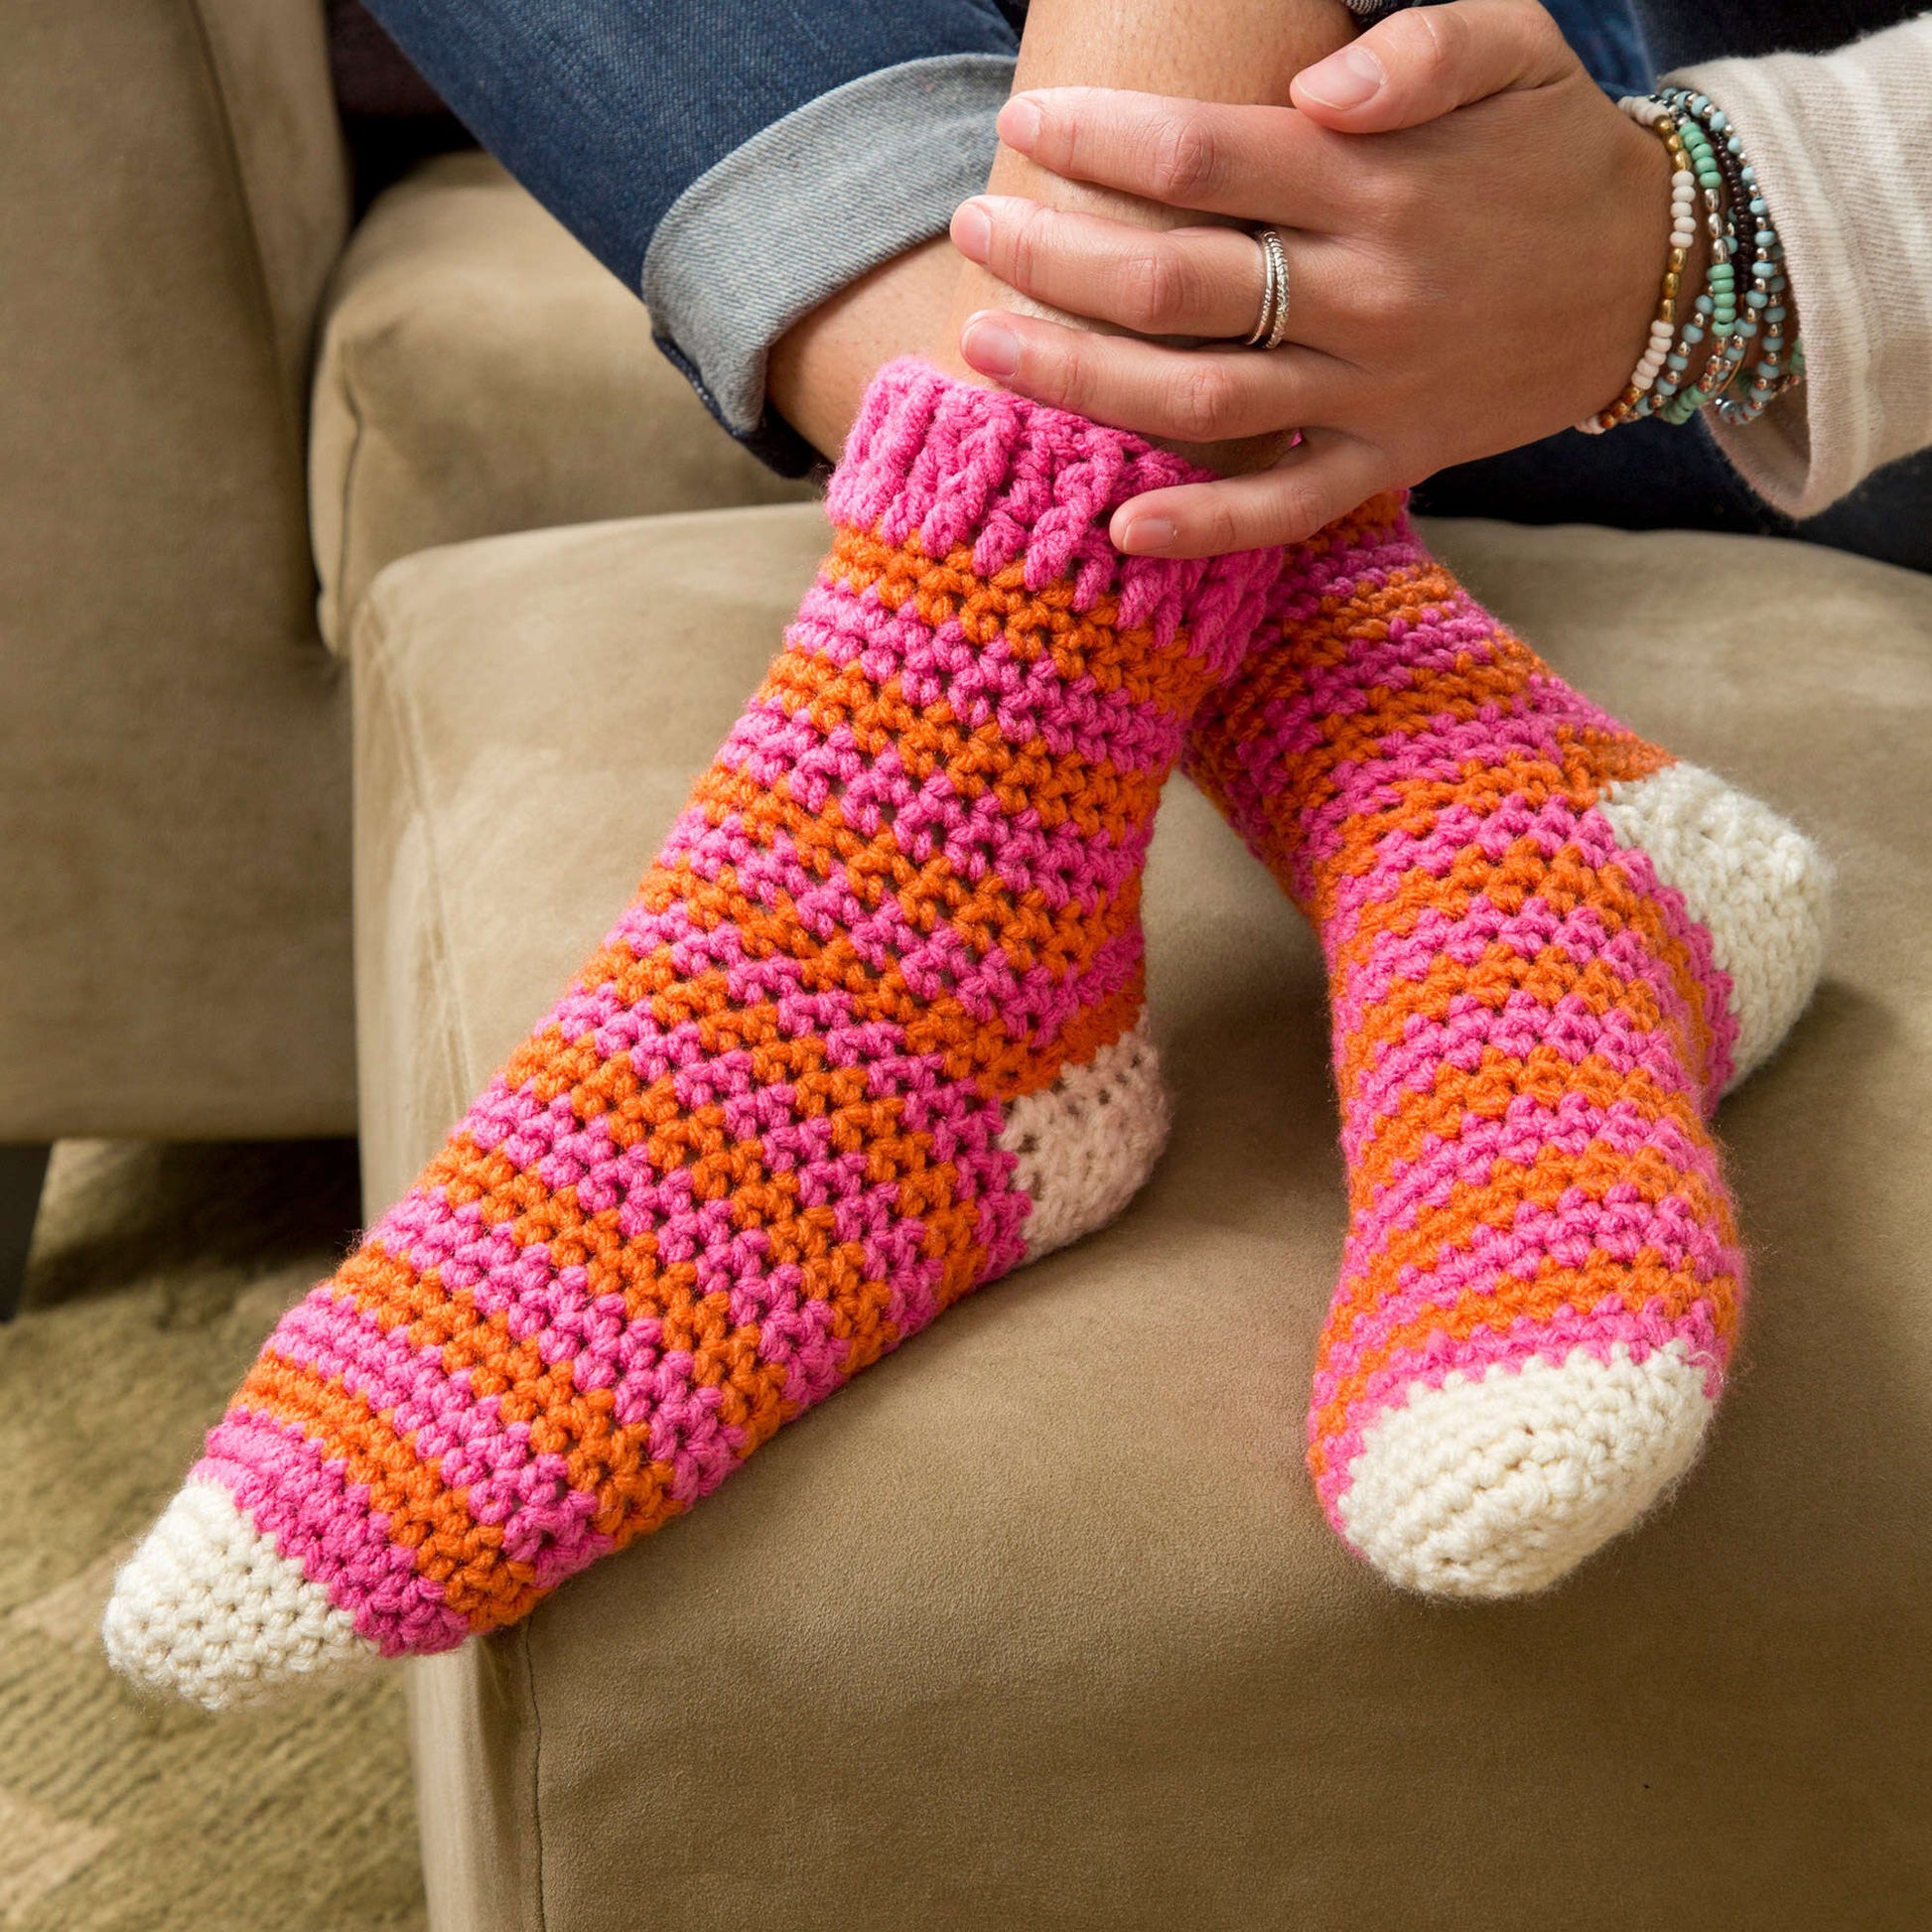 Red Heart Cozy At Home Crochet Socks Red Heart Cozy At Home Crochet Socks